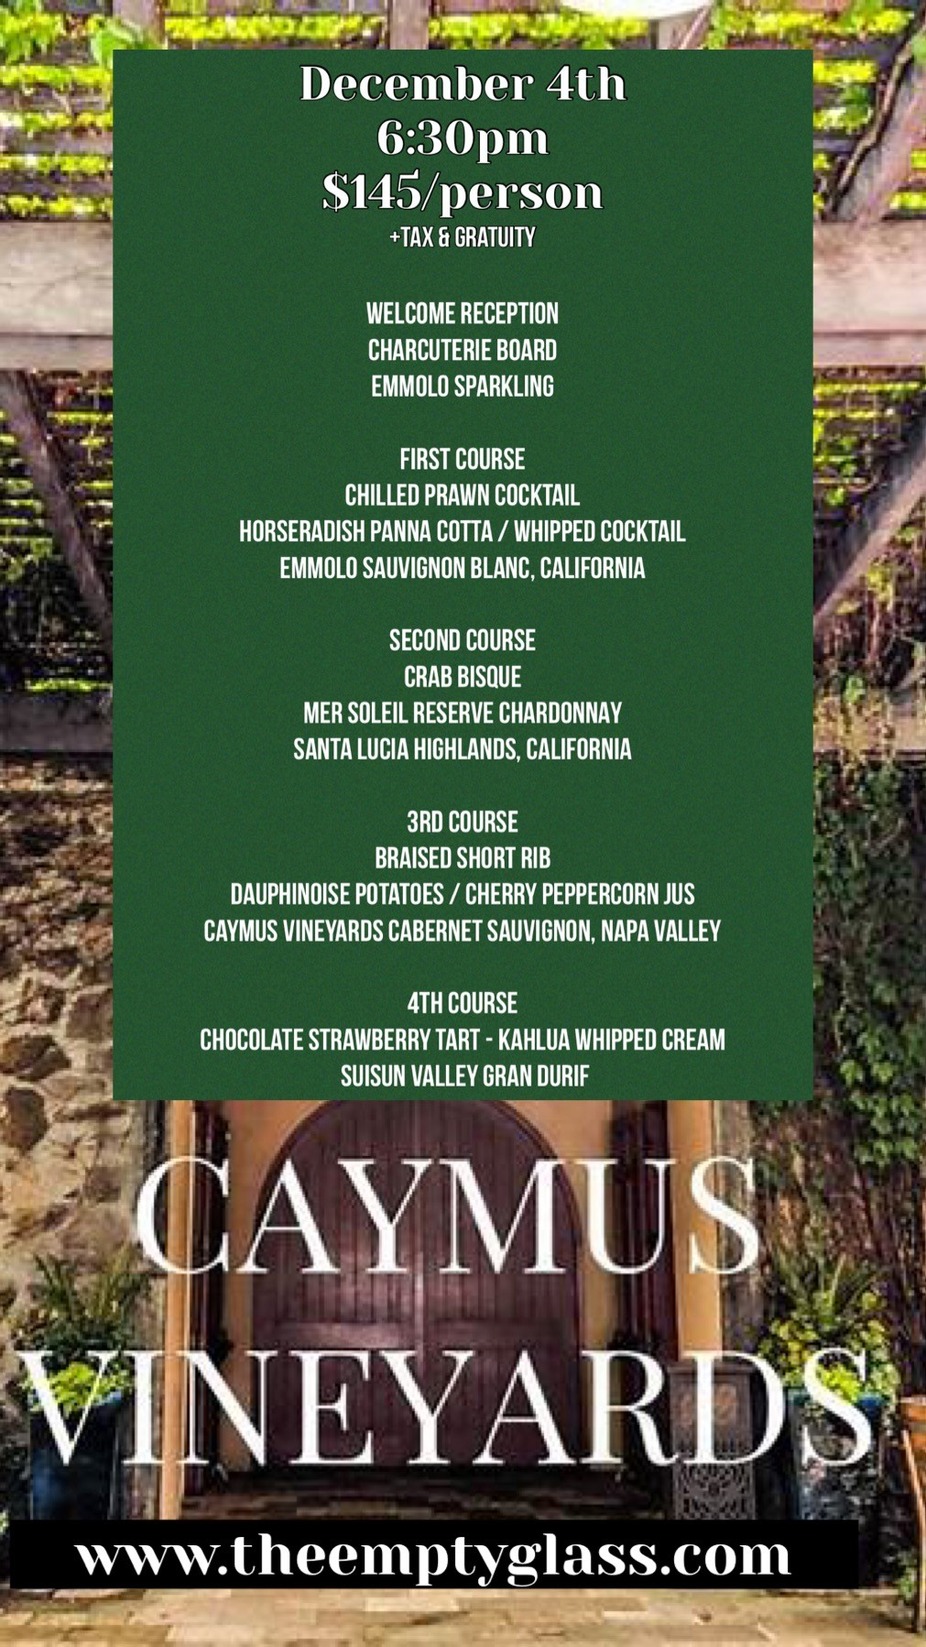 3rd Caymus Dinner - SOLD OUT event photo